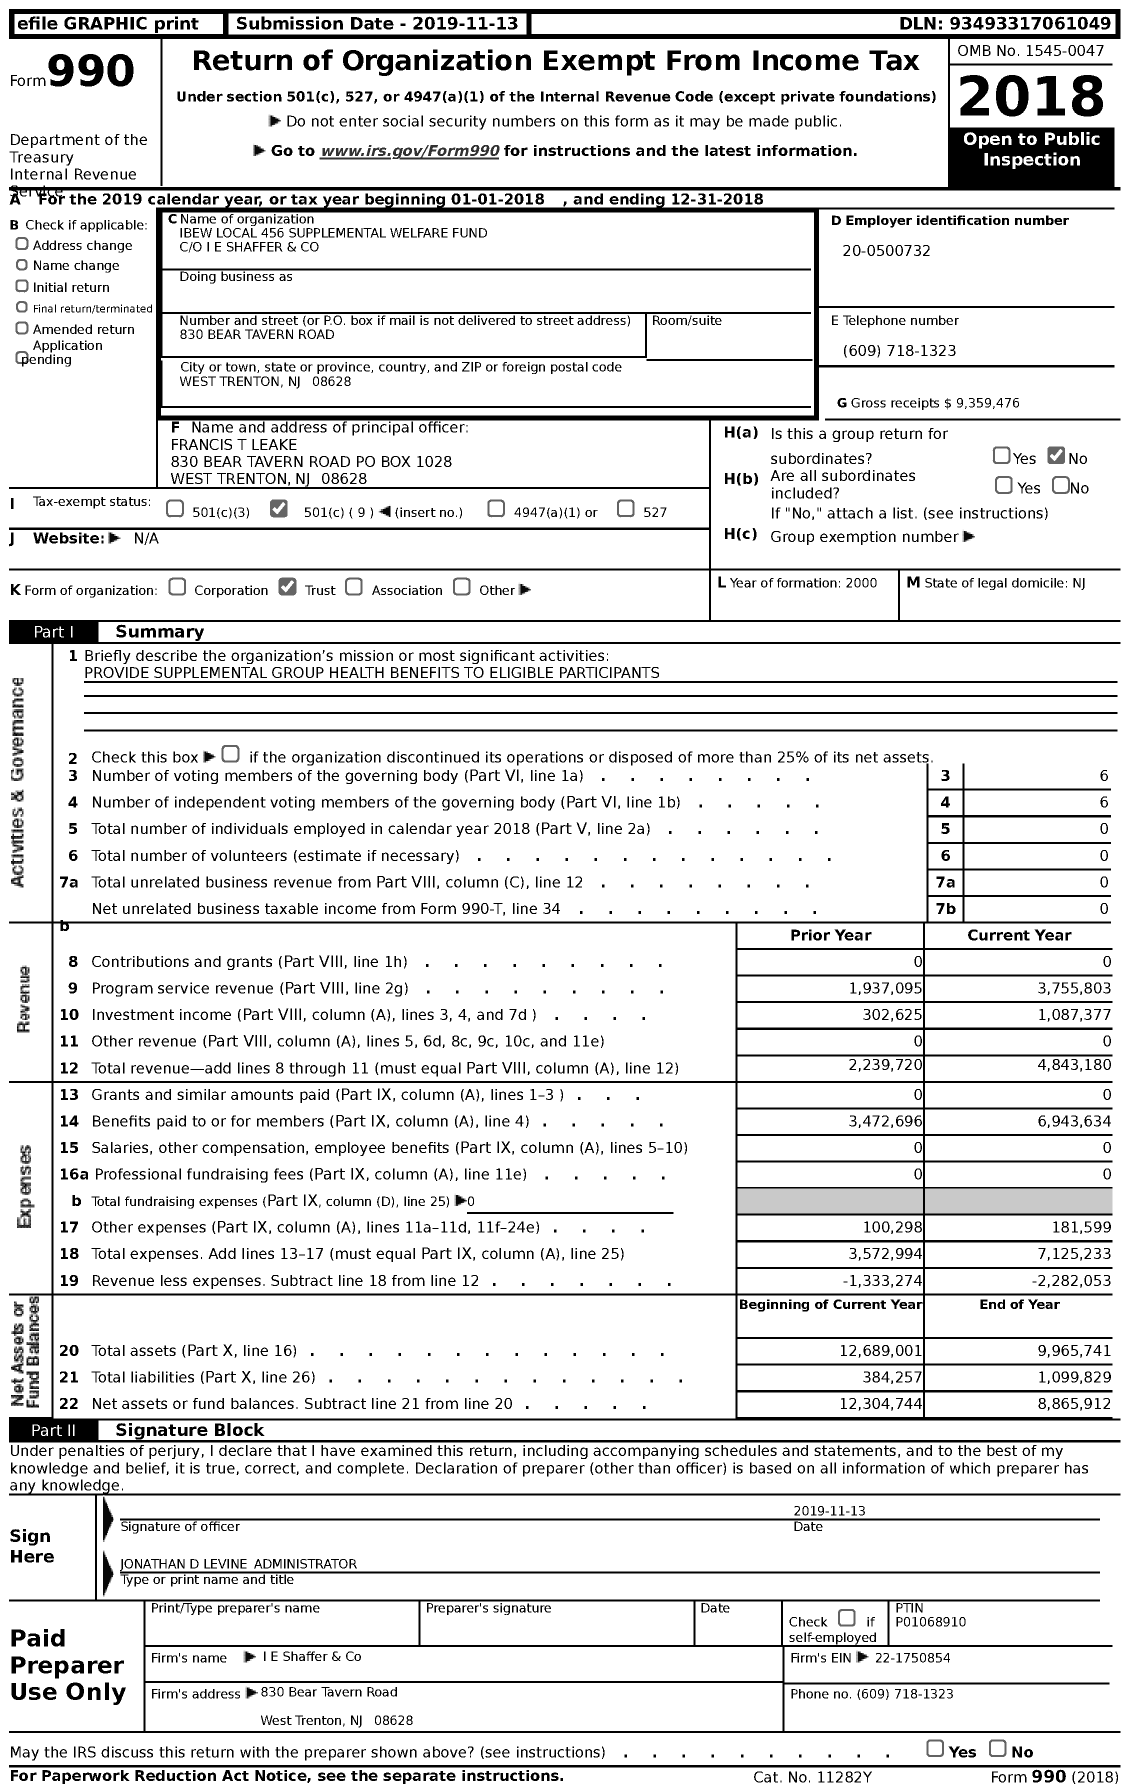 Image of first page of 2018 Form 990 for IBEW Local 456 Supplemental Welfare Fund